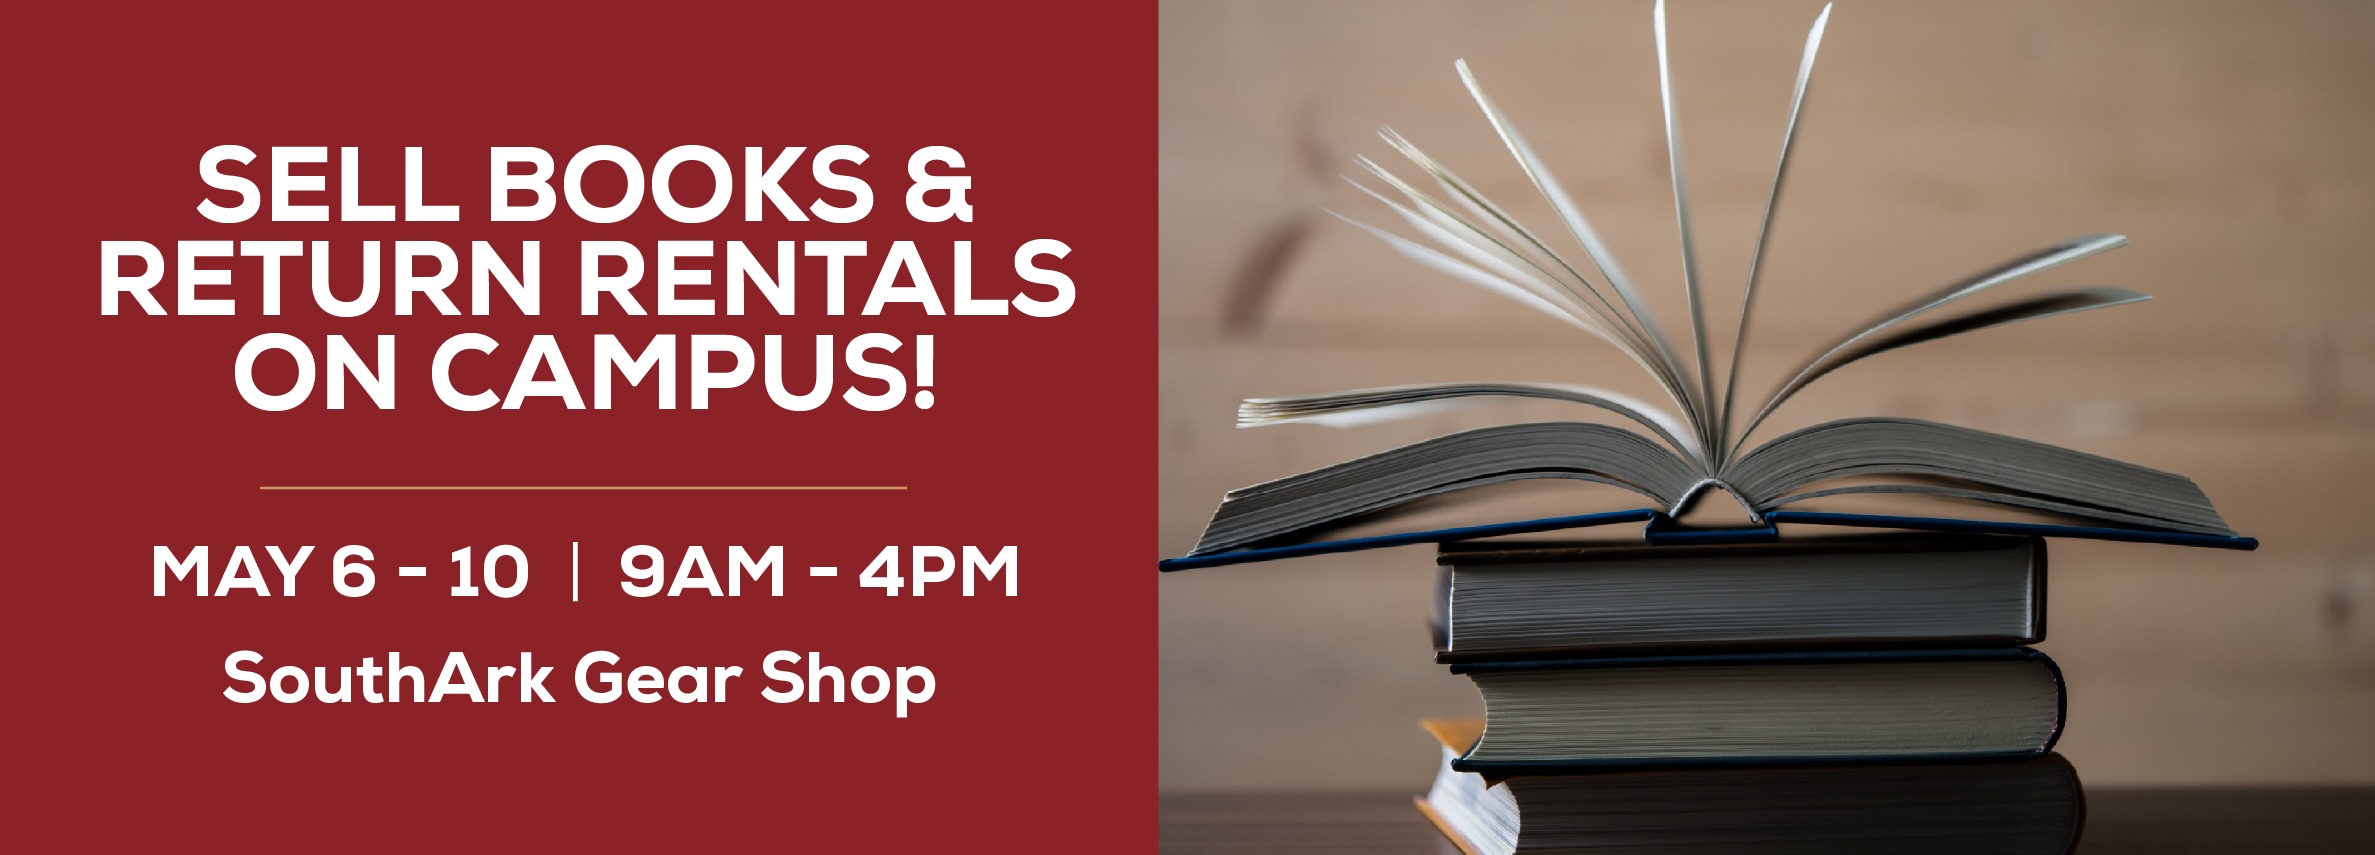 Sell books and return rentals on campus! May 6 - 10. 9am to 4pm. SouthArk Gear Shop.